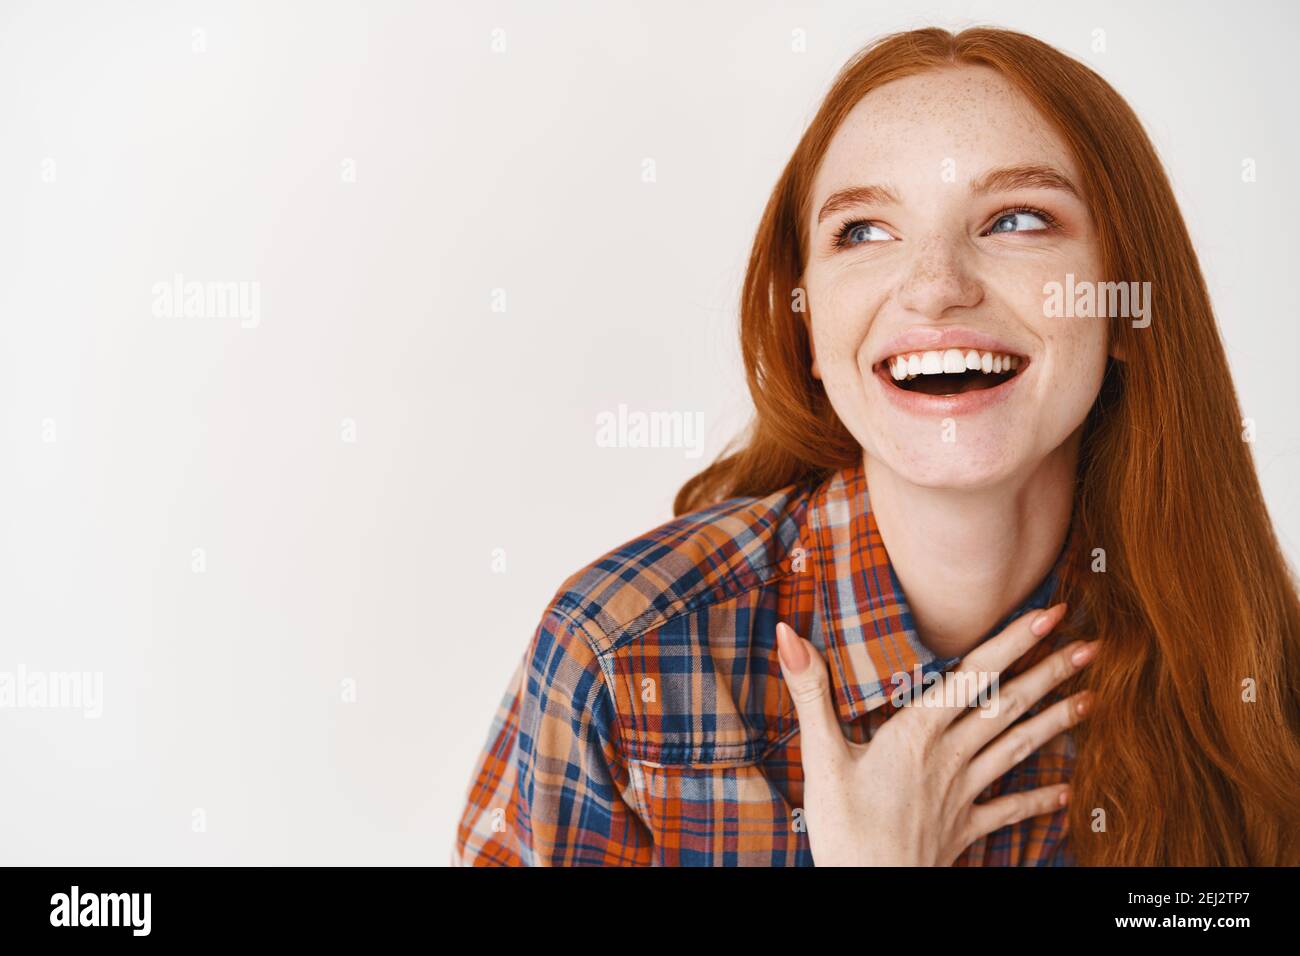 Close-up of beautiful woman with red hair and pale skin laughing happy, holding hand on heart and looking left at logo, standing over white background Stock Photo